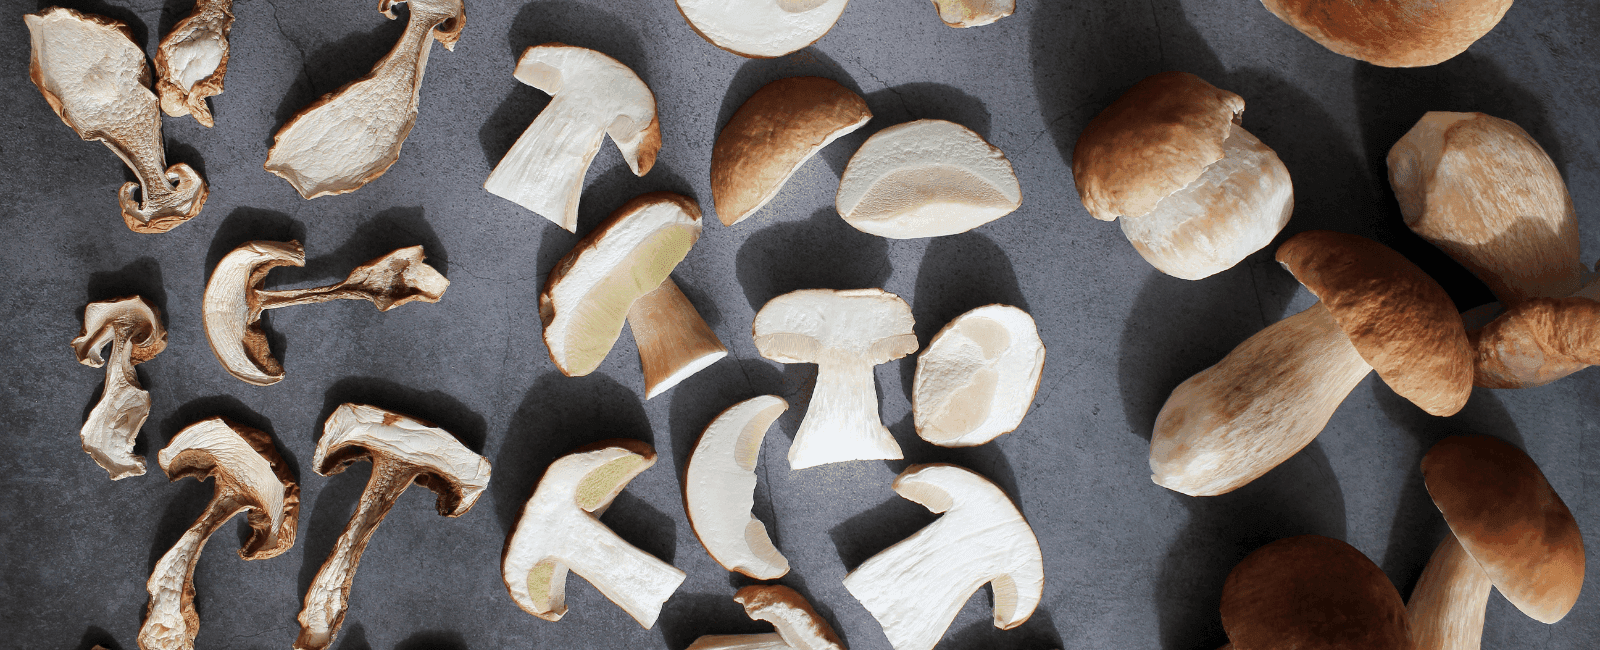 Top Tips on How to Store Mushrooms for Ultimate Freshness